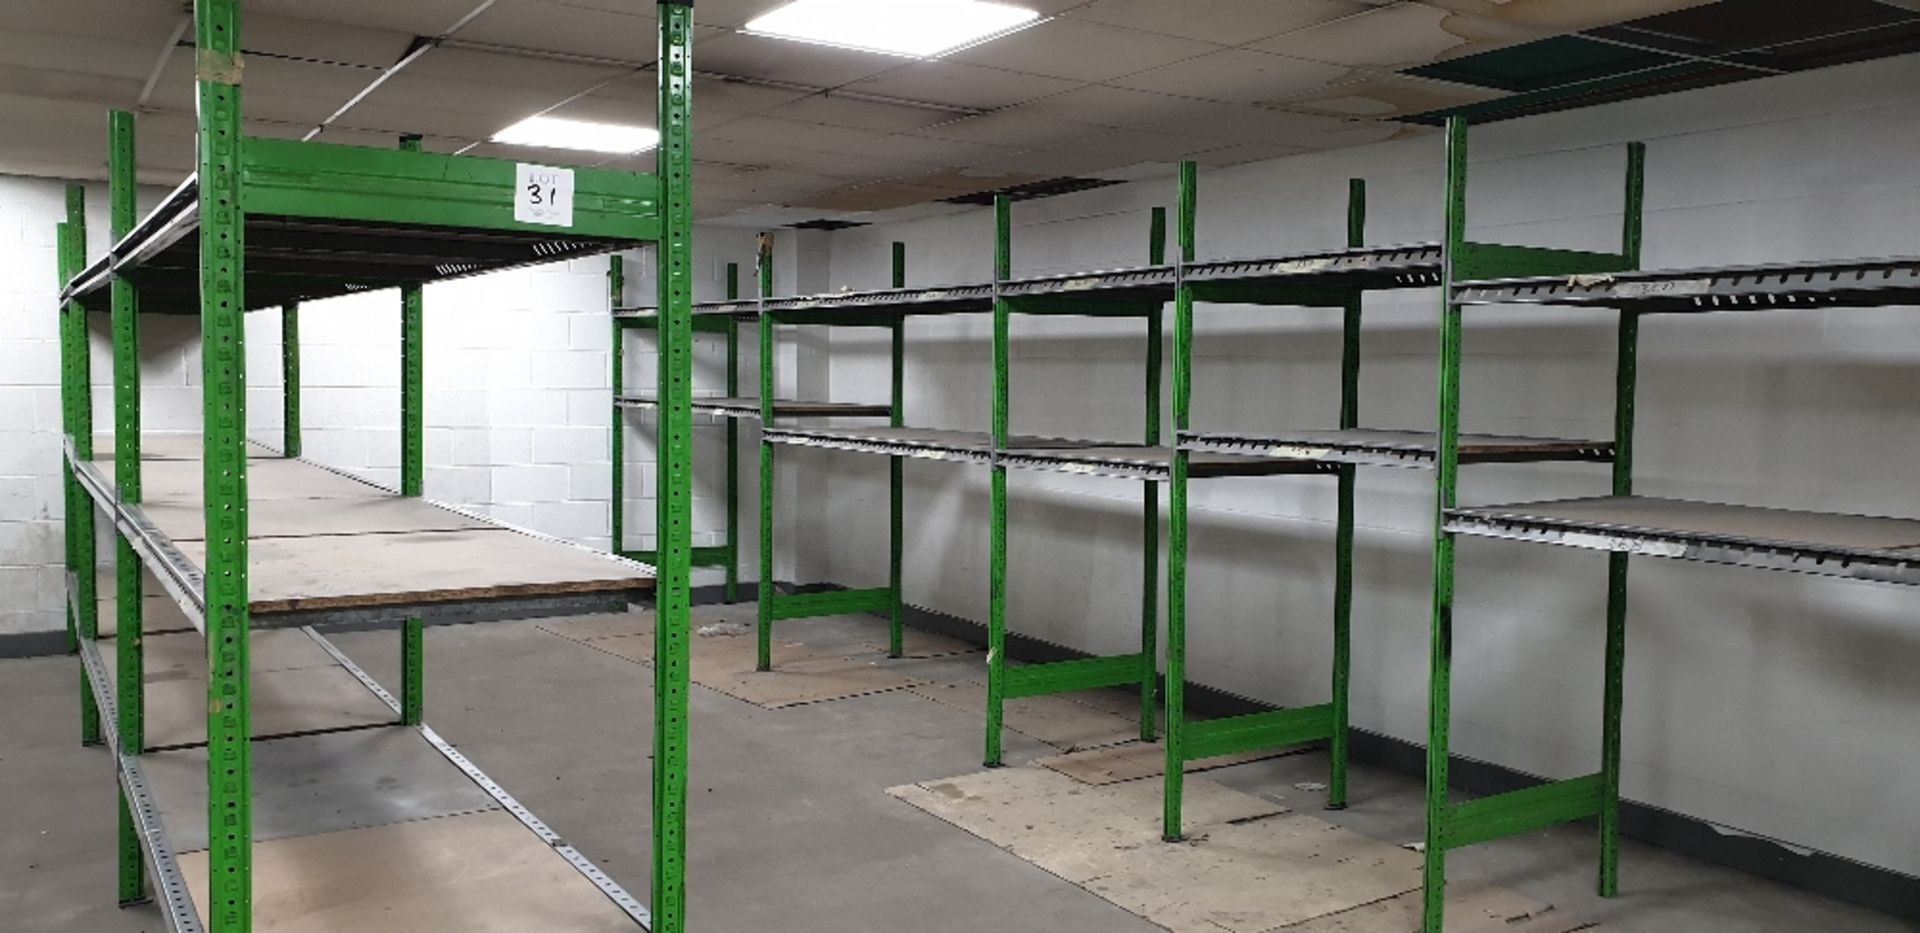 13 - bays of adjustable boltless shelving (bay size 2000m x 800m x 2200mm high) - Image 3 of 4